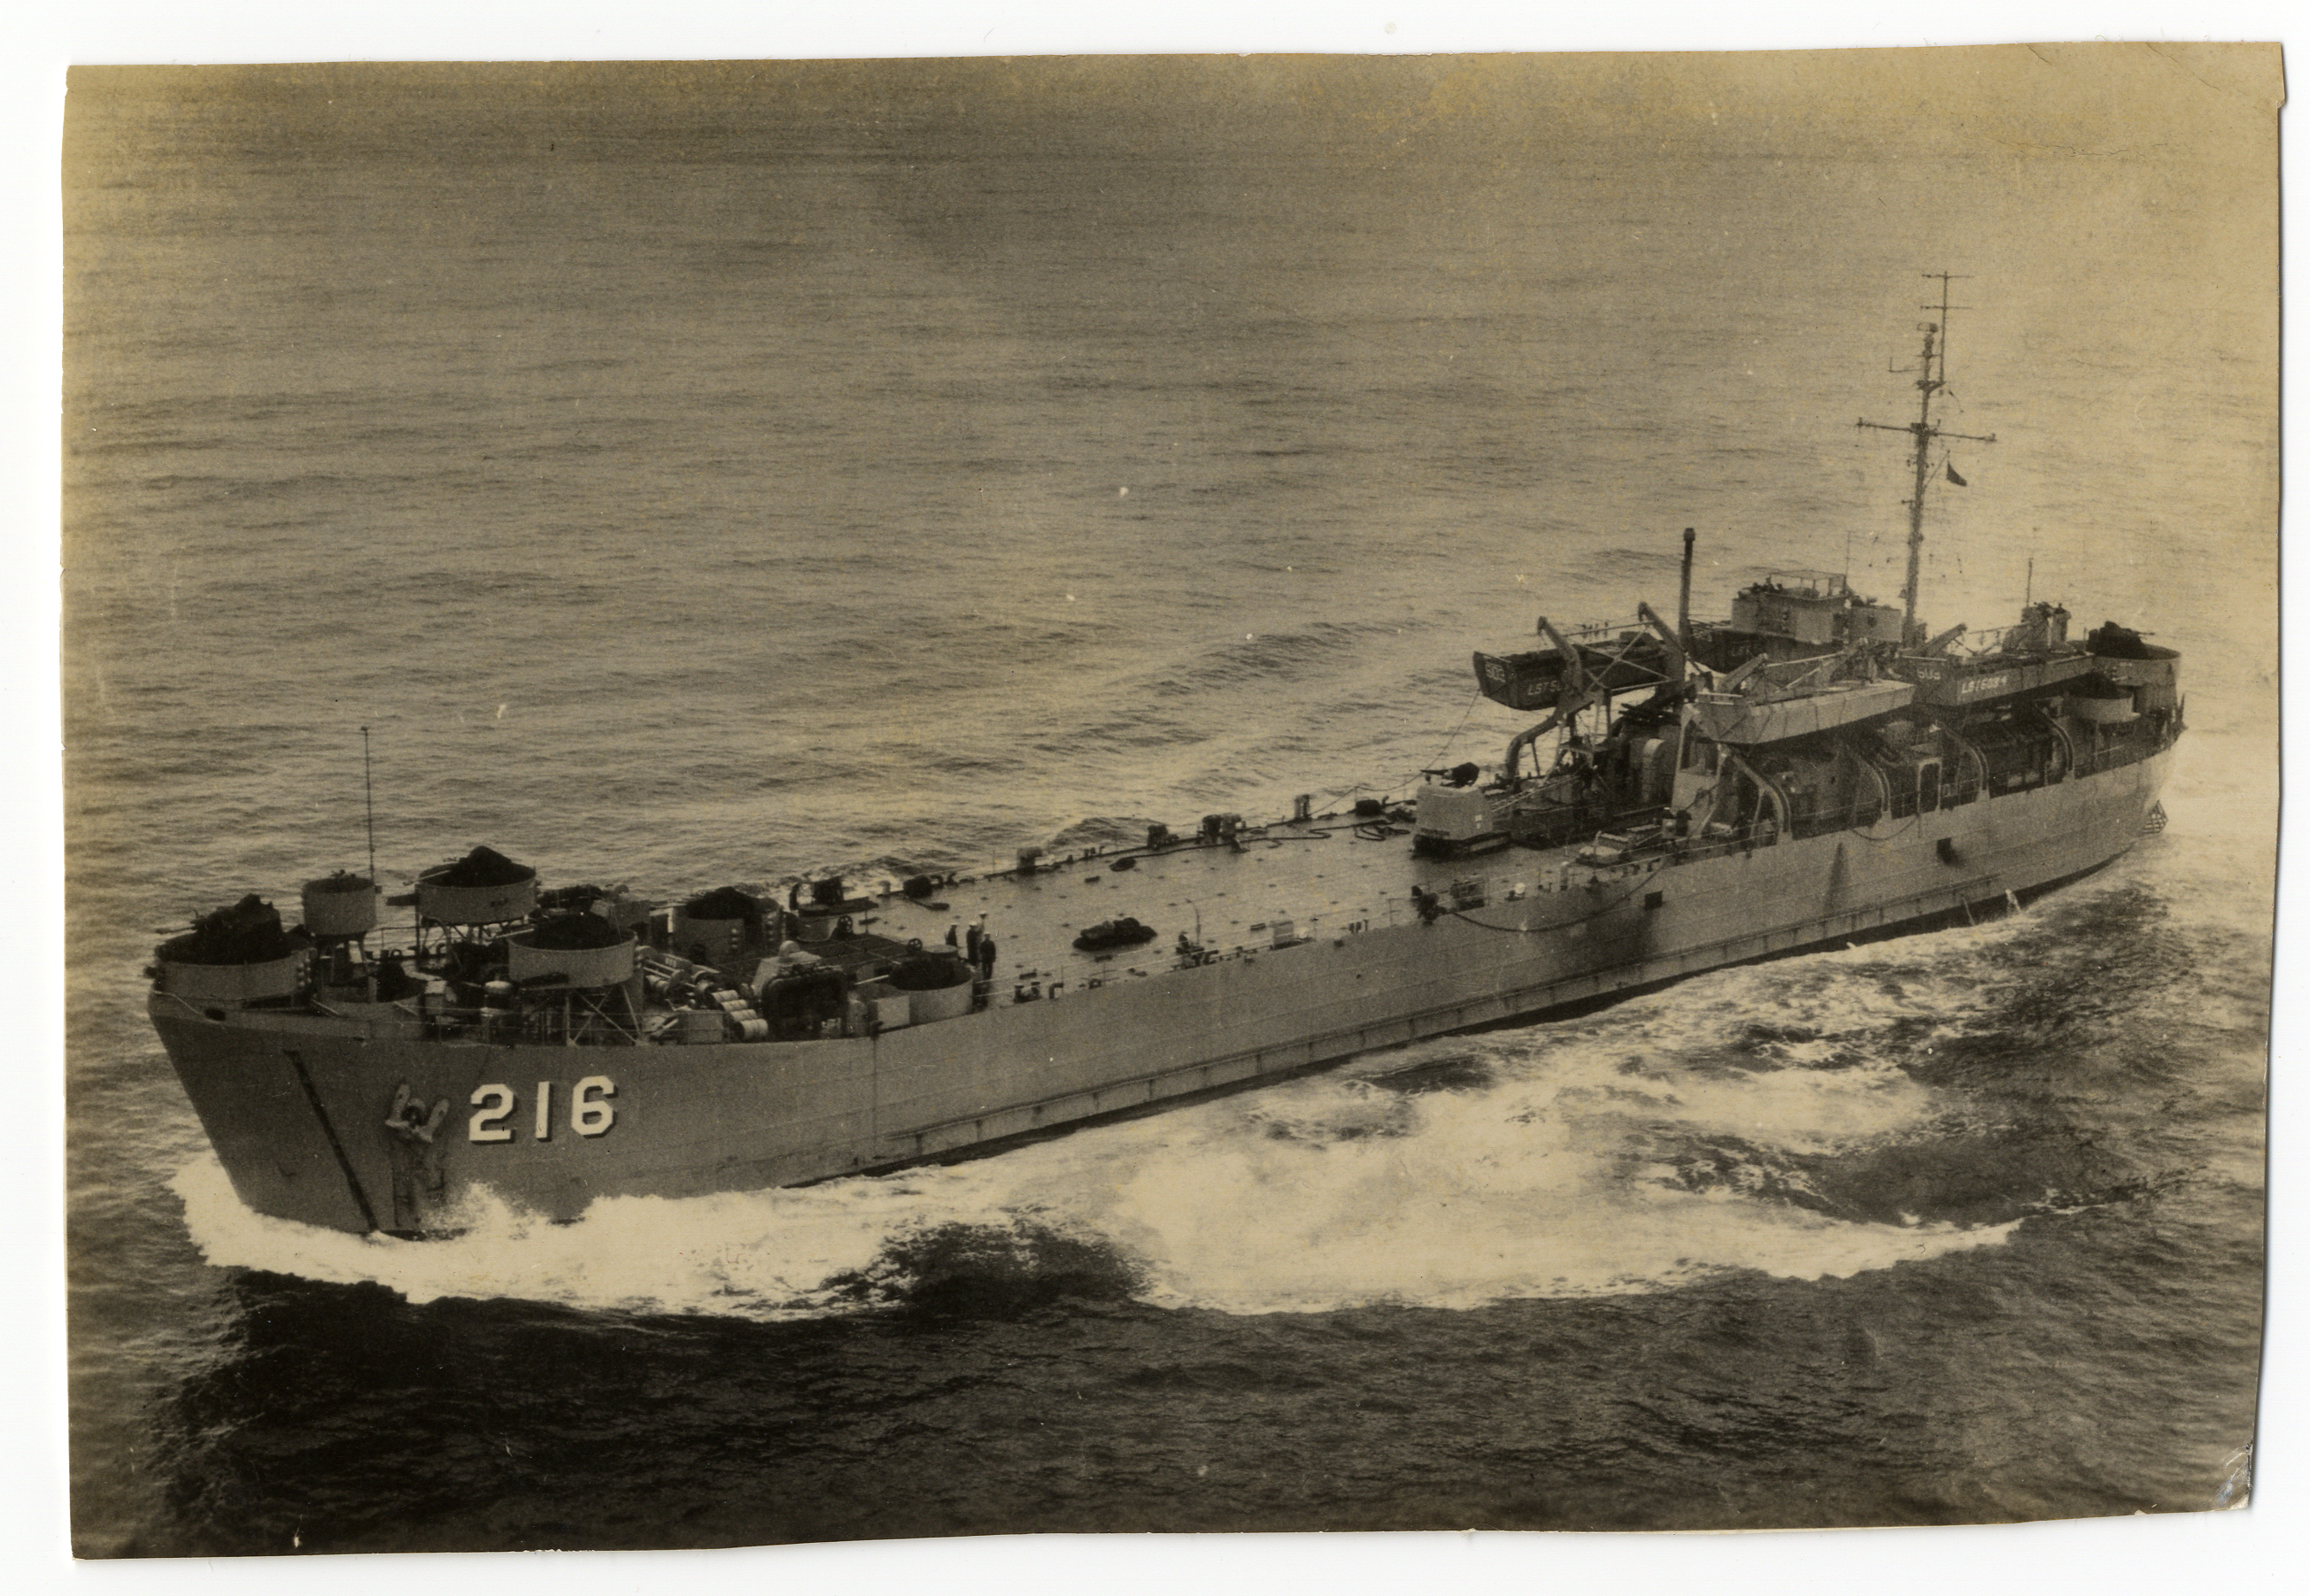 The naval freighter Zhongding that shipped the first batch of artifacts to Taiwan in late